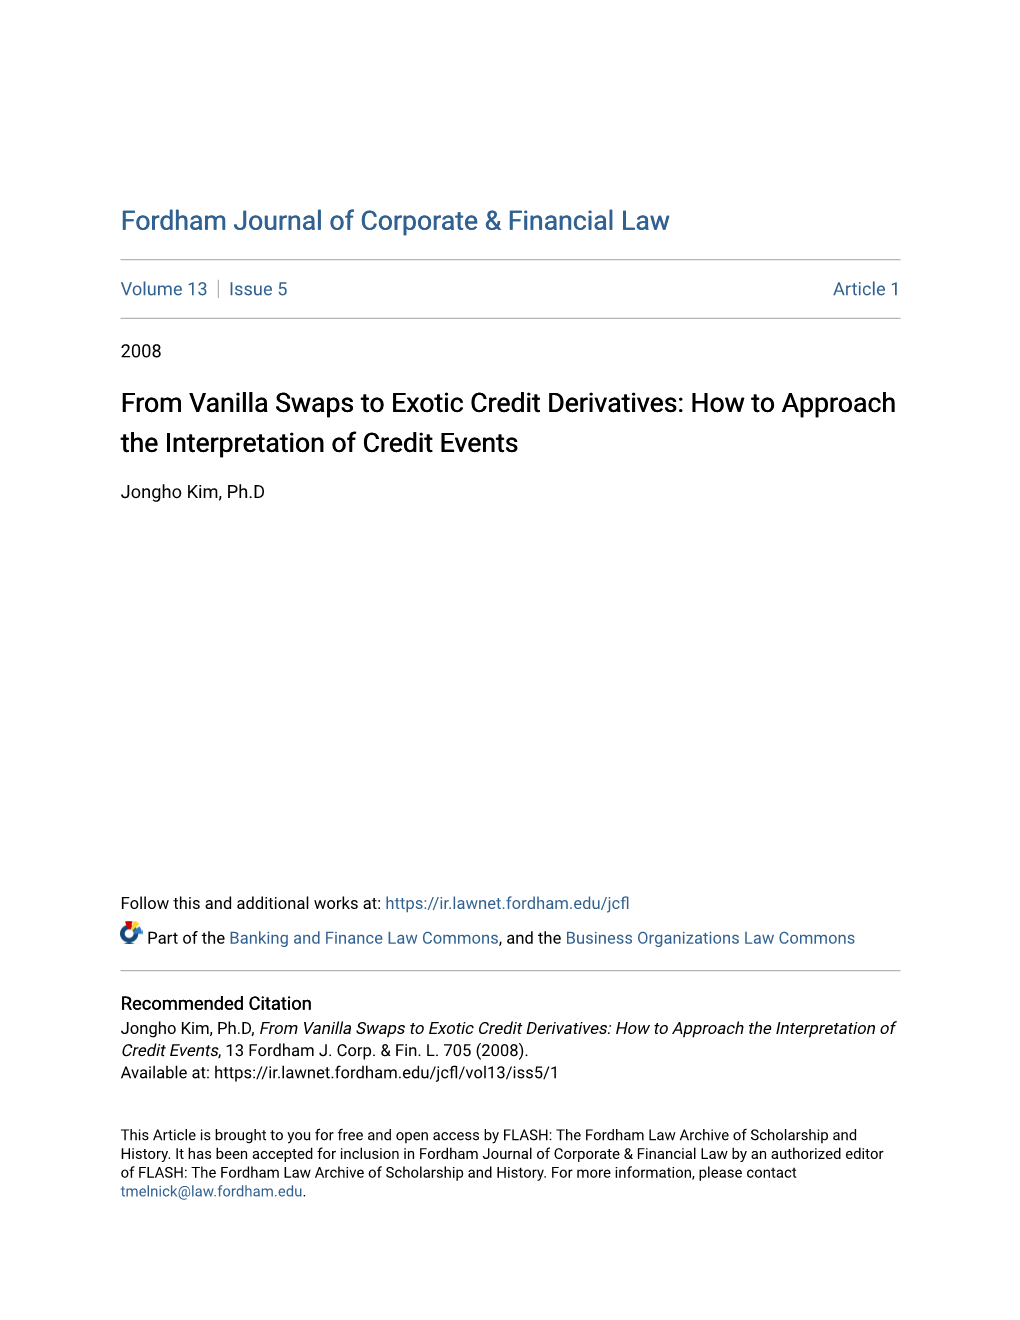 From Vanilla Swaps to Exotic Credit Derivatives: How to Approach the Interpretation of Credit Events